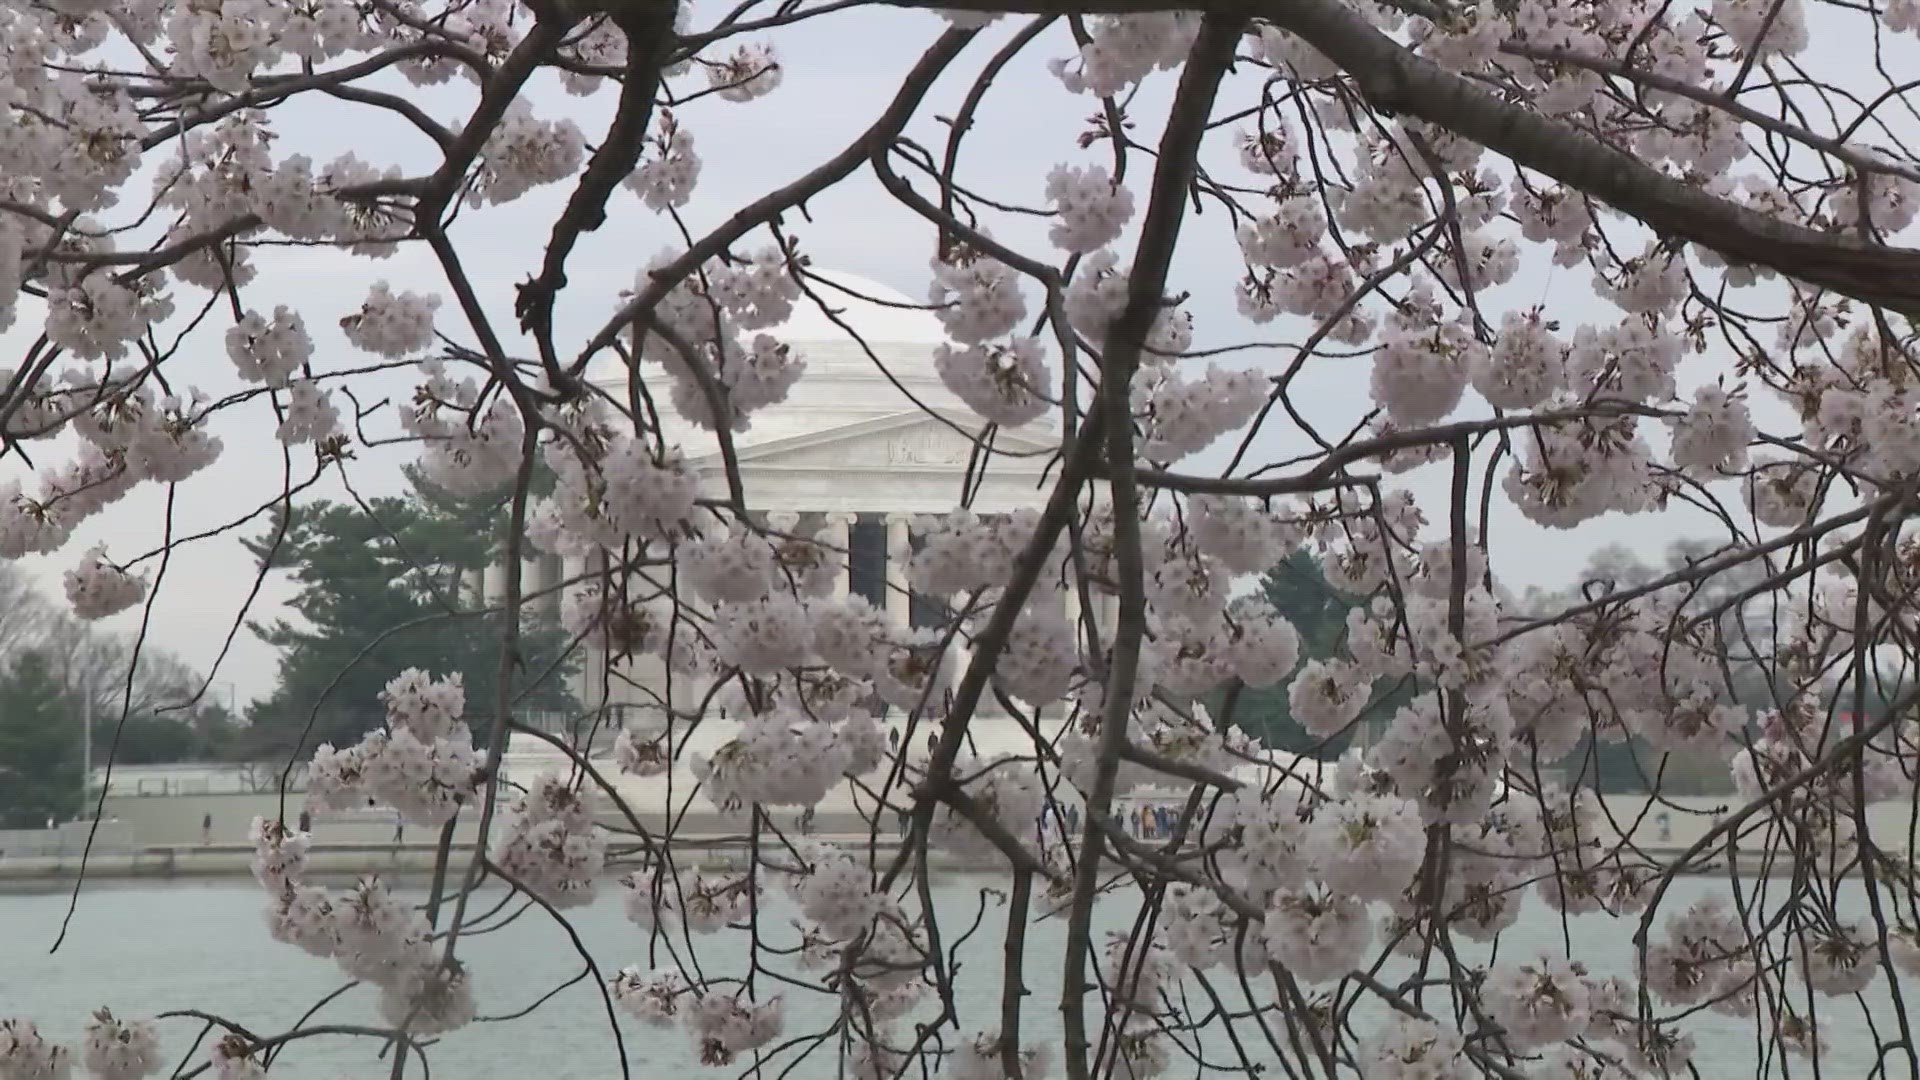 The National Park Service is expecting the Cherry Blossom trees to make peak bloom between March 23-26.